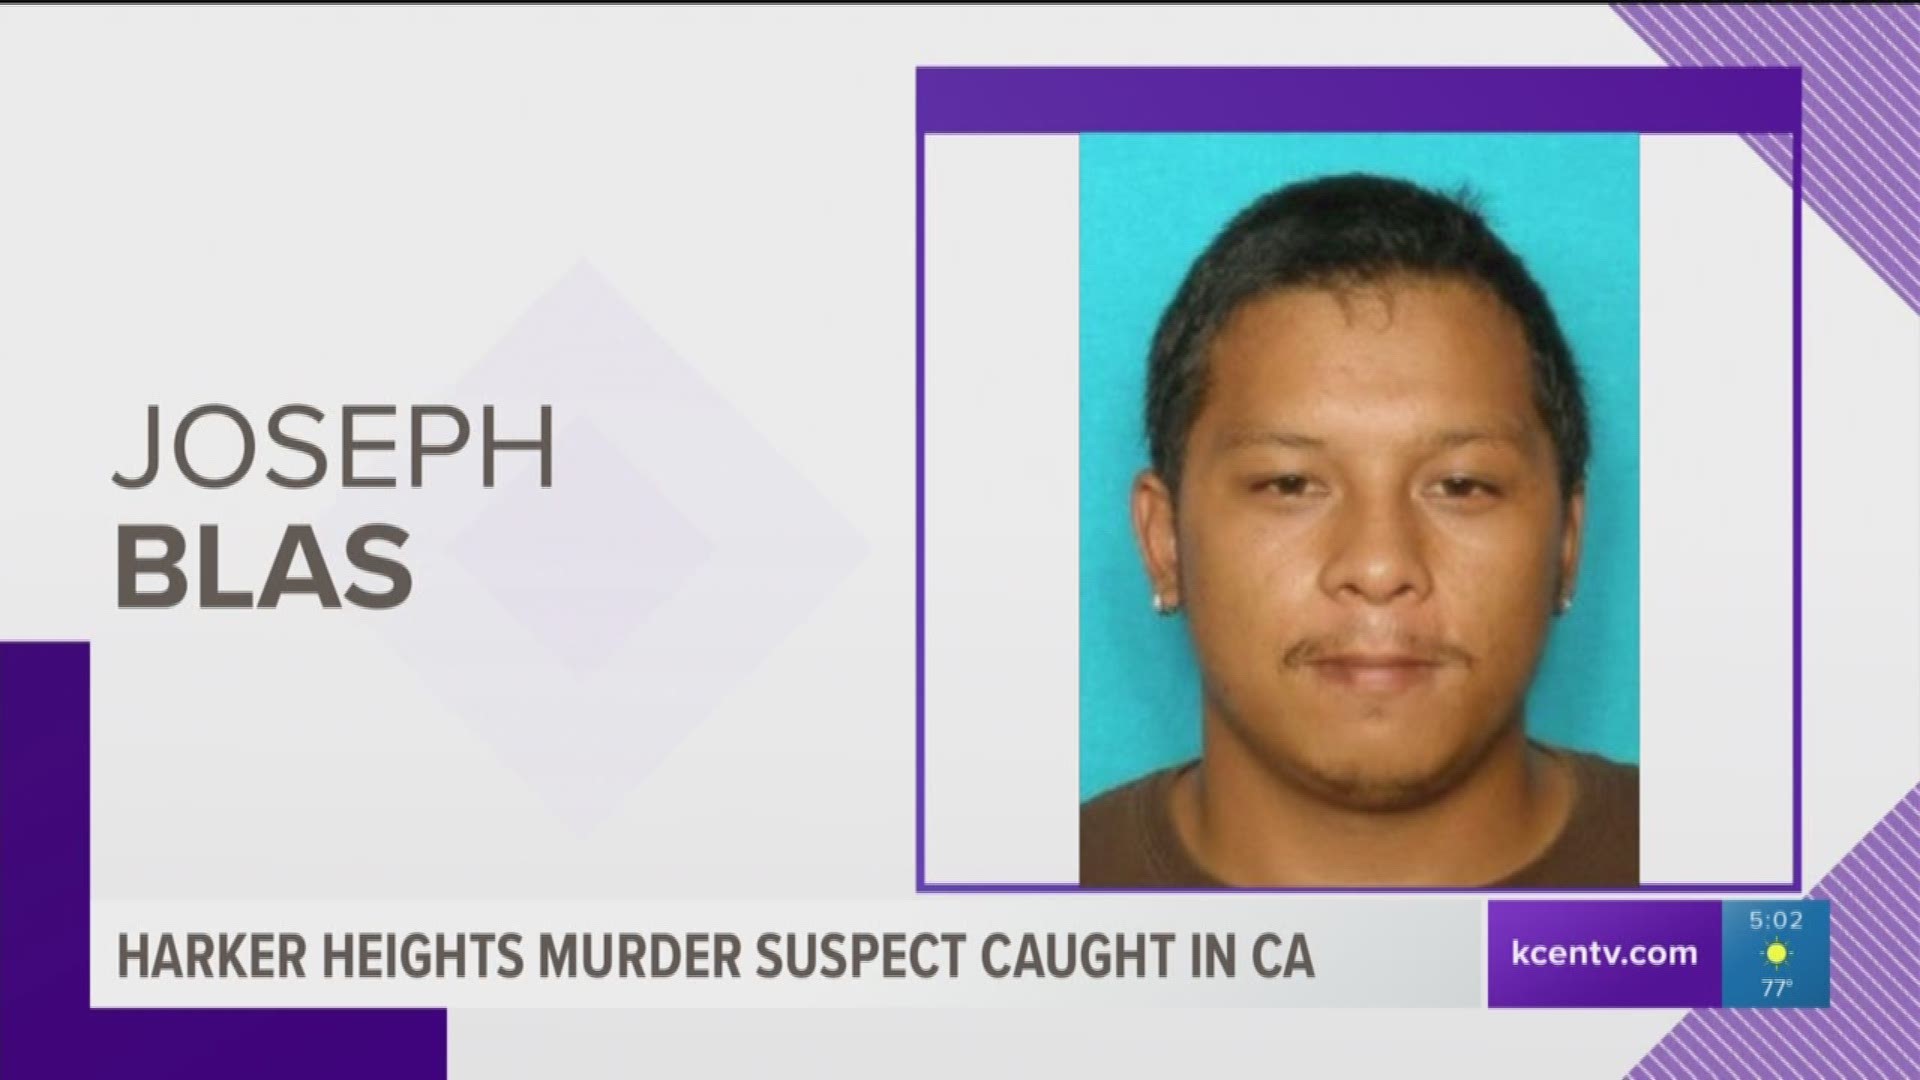 A Harker Heights man suspected of fatally shooting a man last month is in custody after being caught in California last week. 